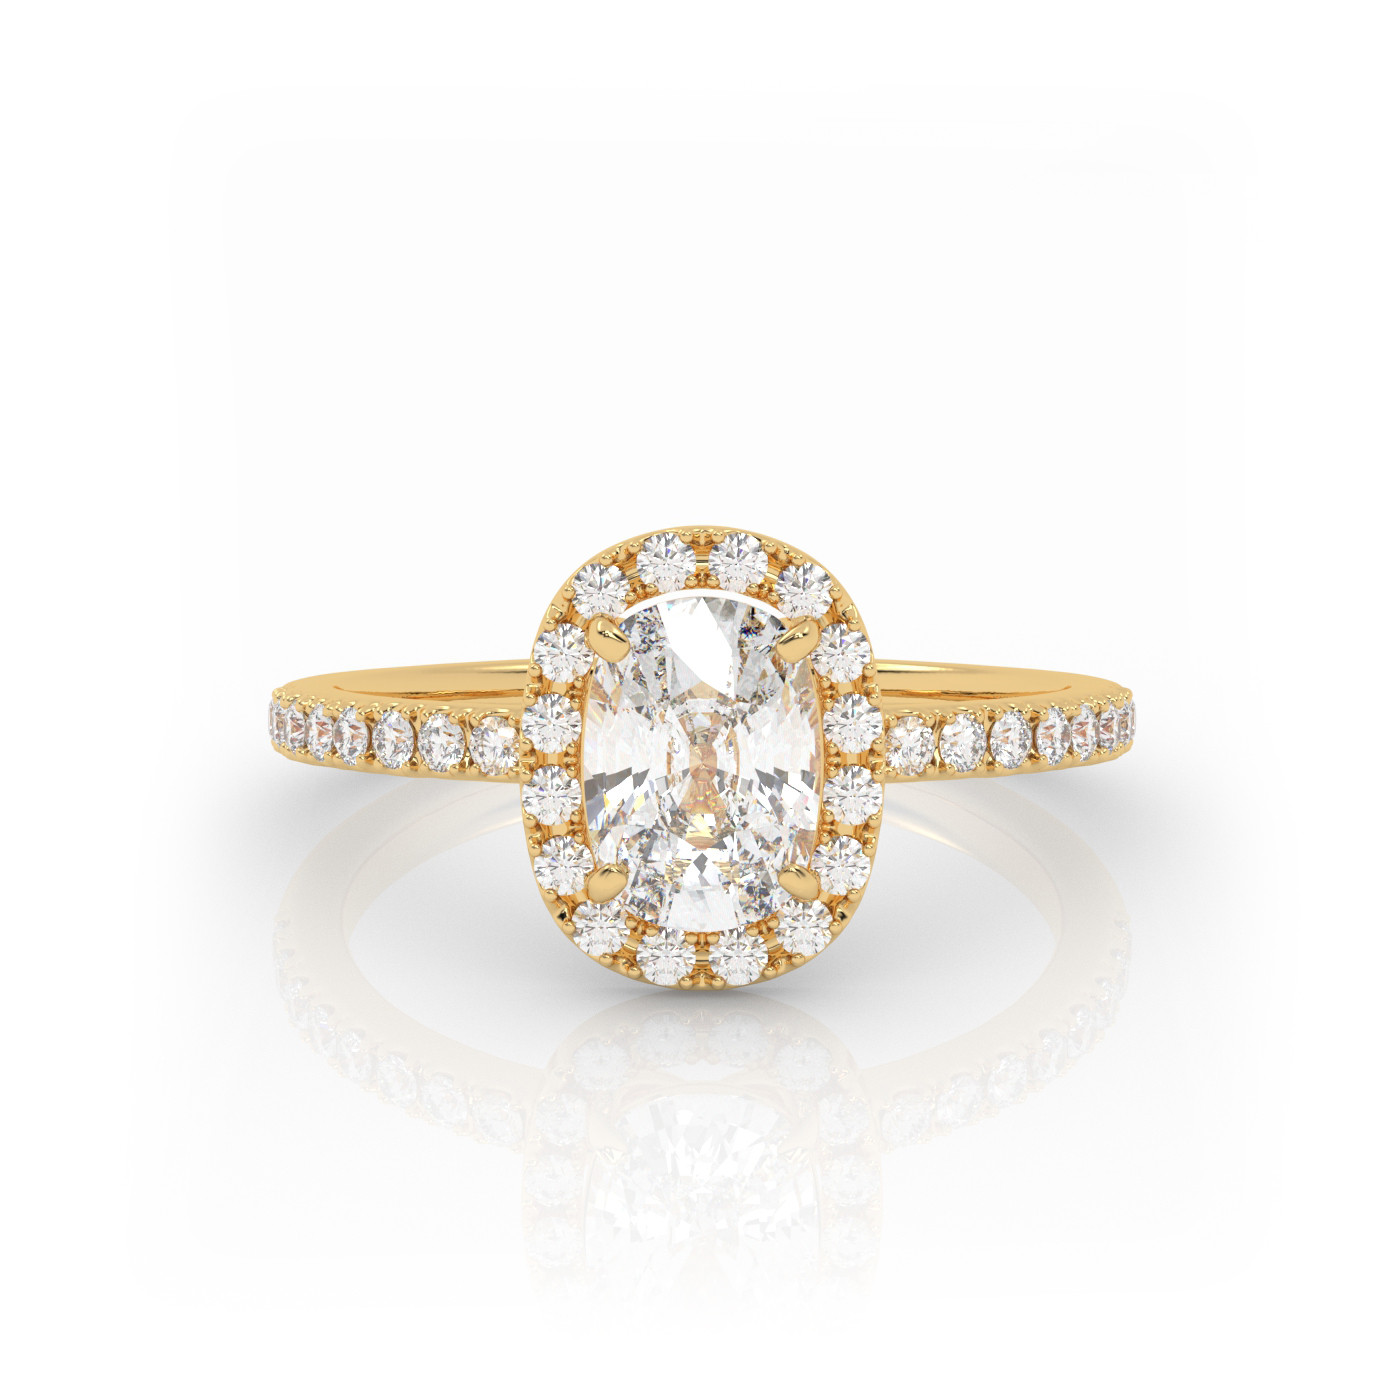 18K YELLOW GOLD Elongated Cushion Diamond Engagement Ring With Pave and Halo Style